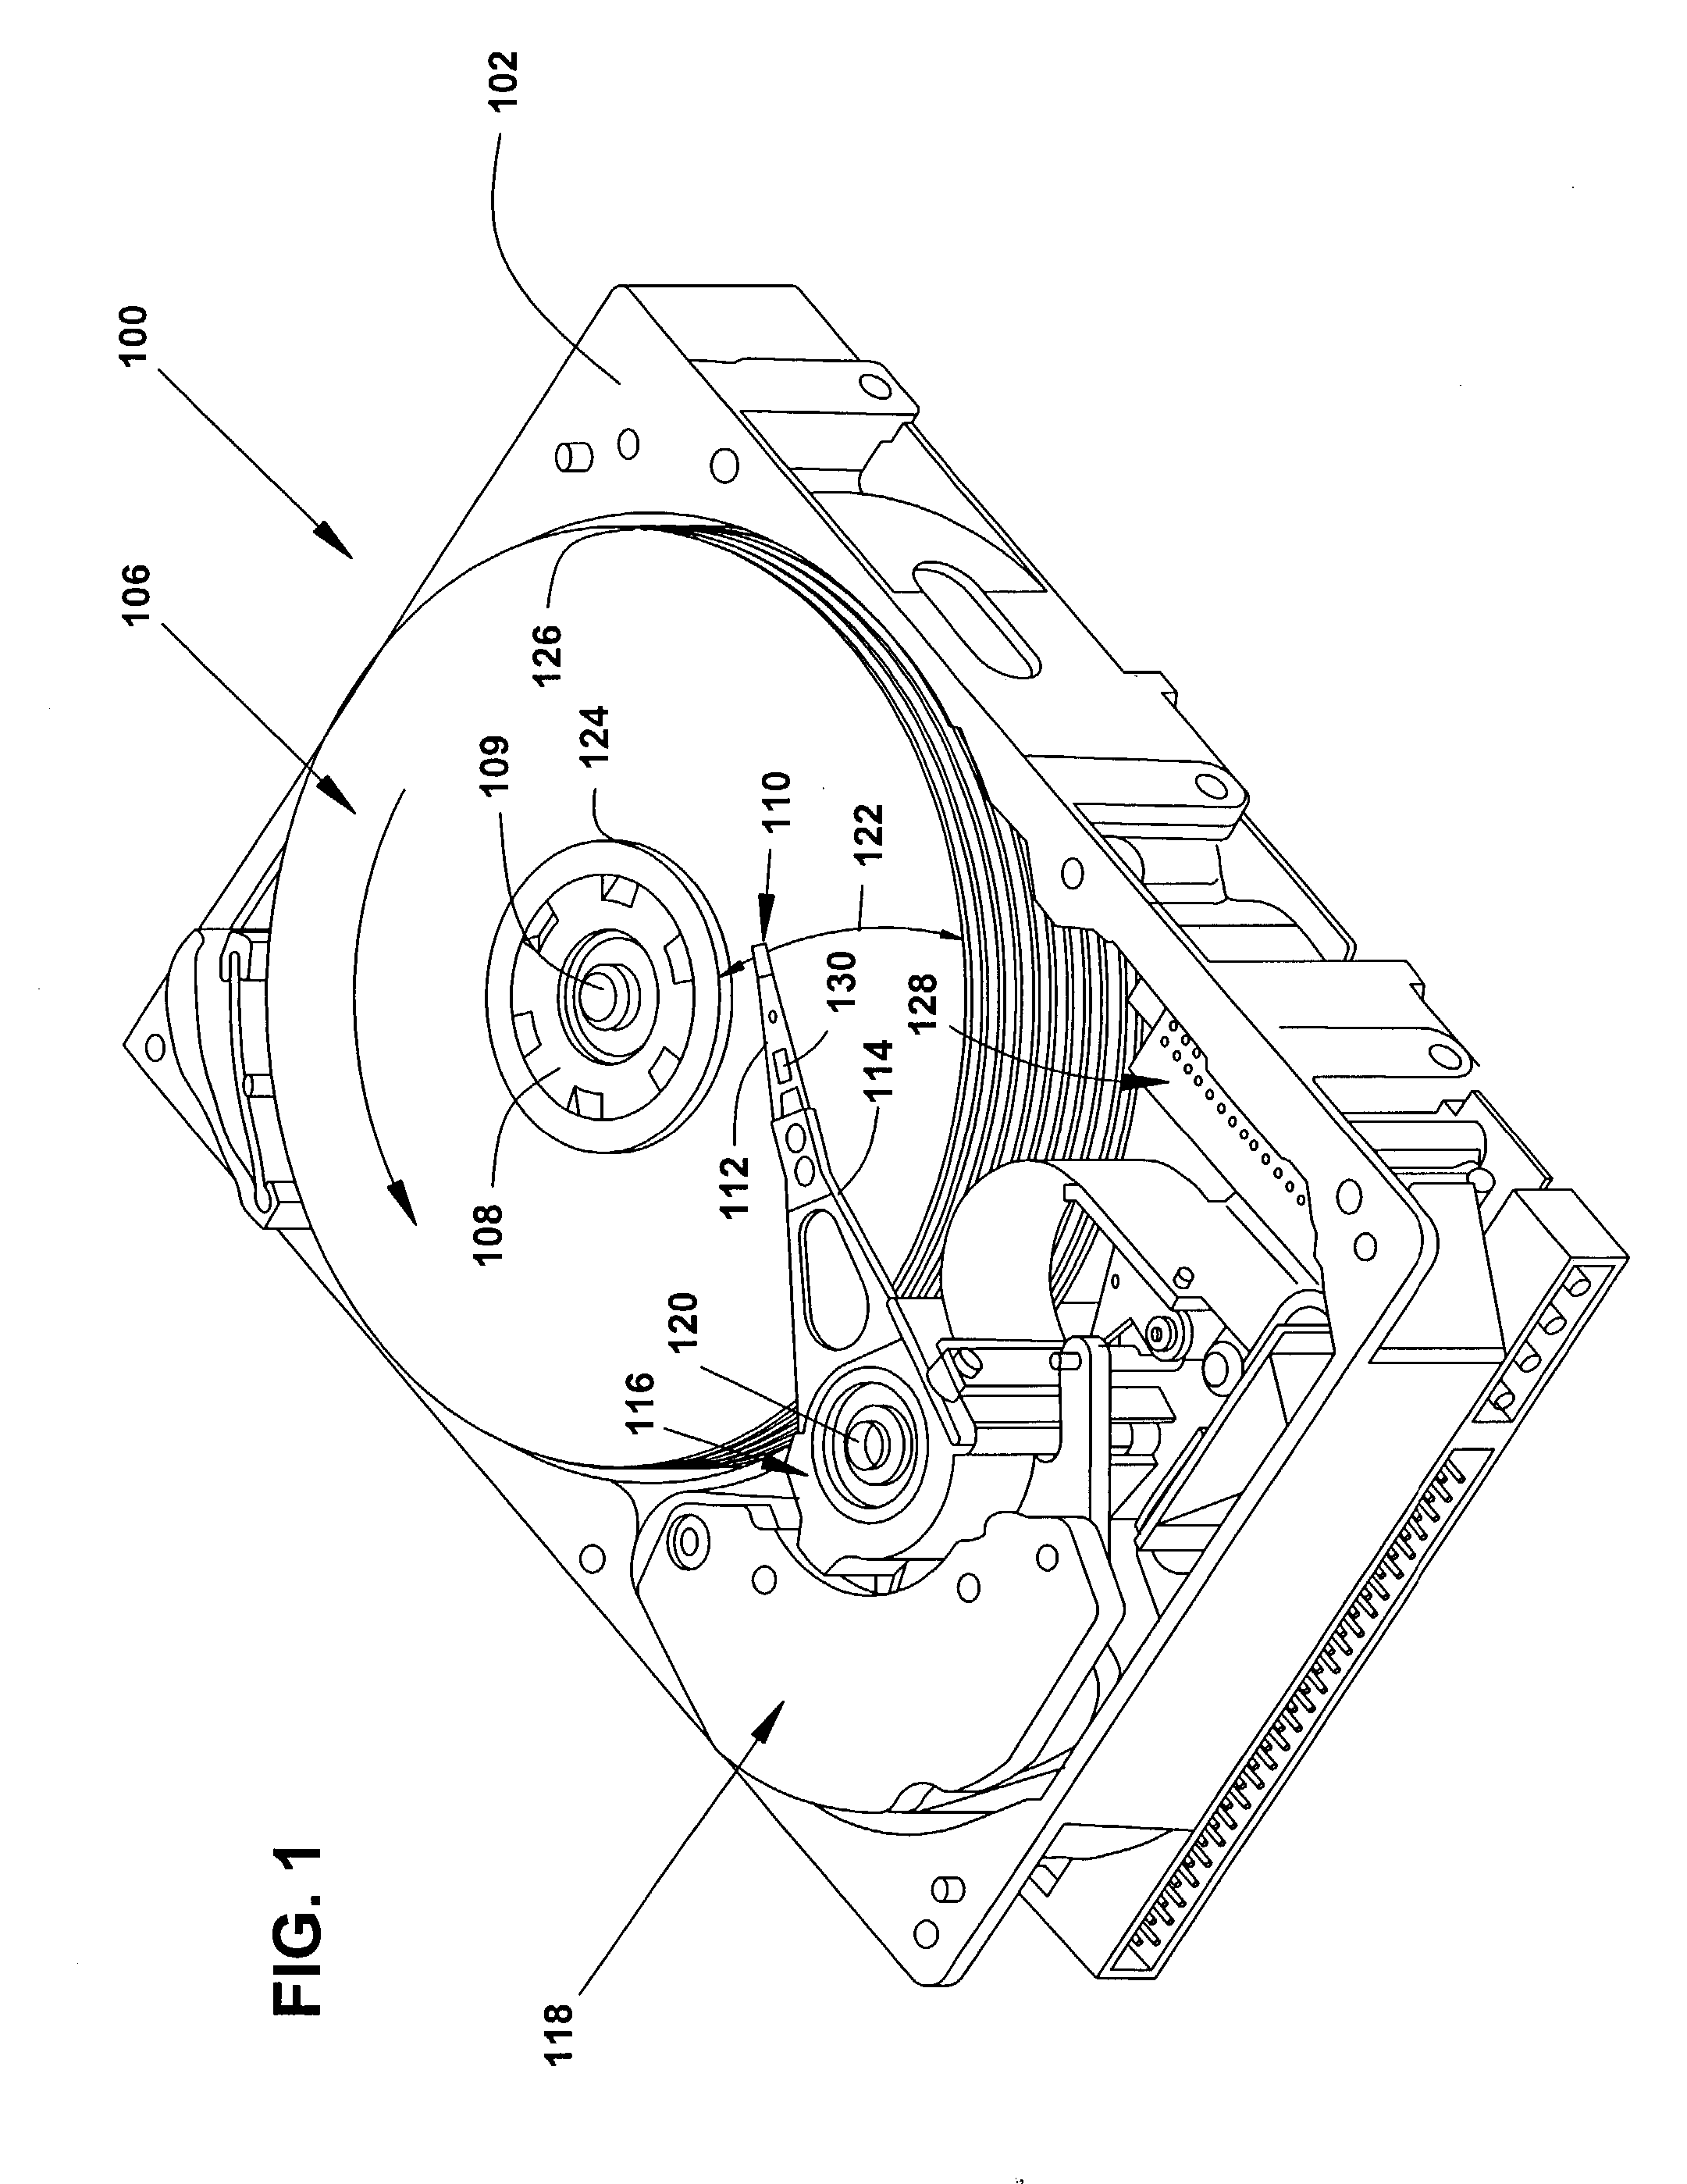 Apparatus and method for maintaining stability in a disc drive servo loop